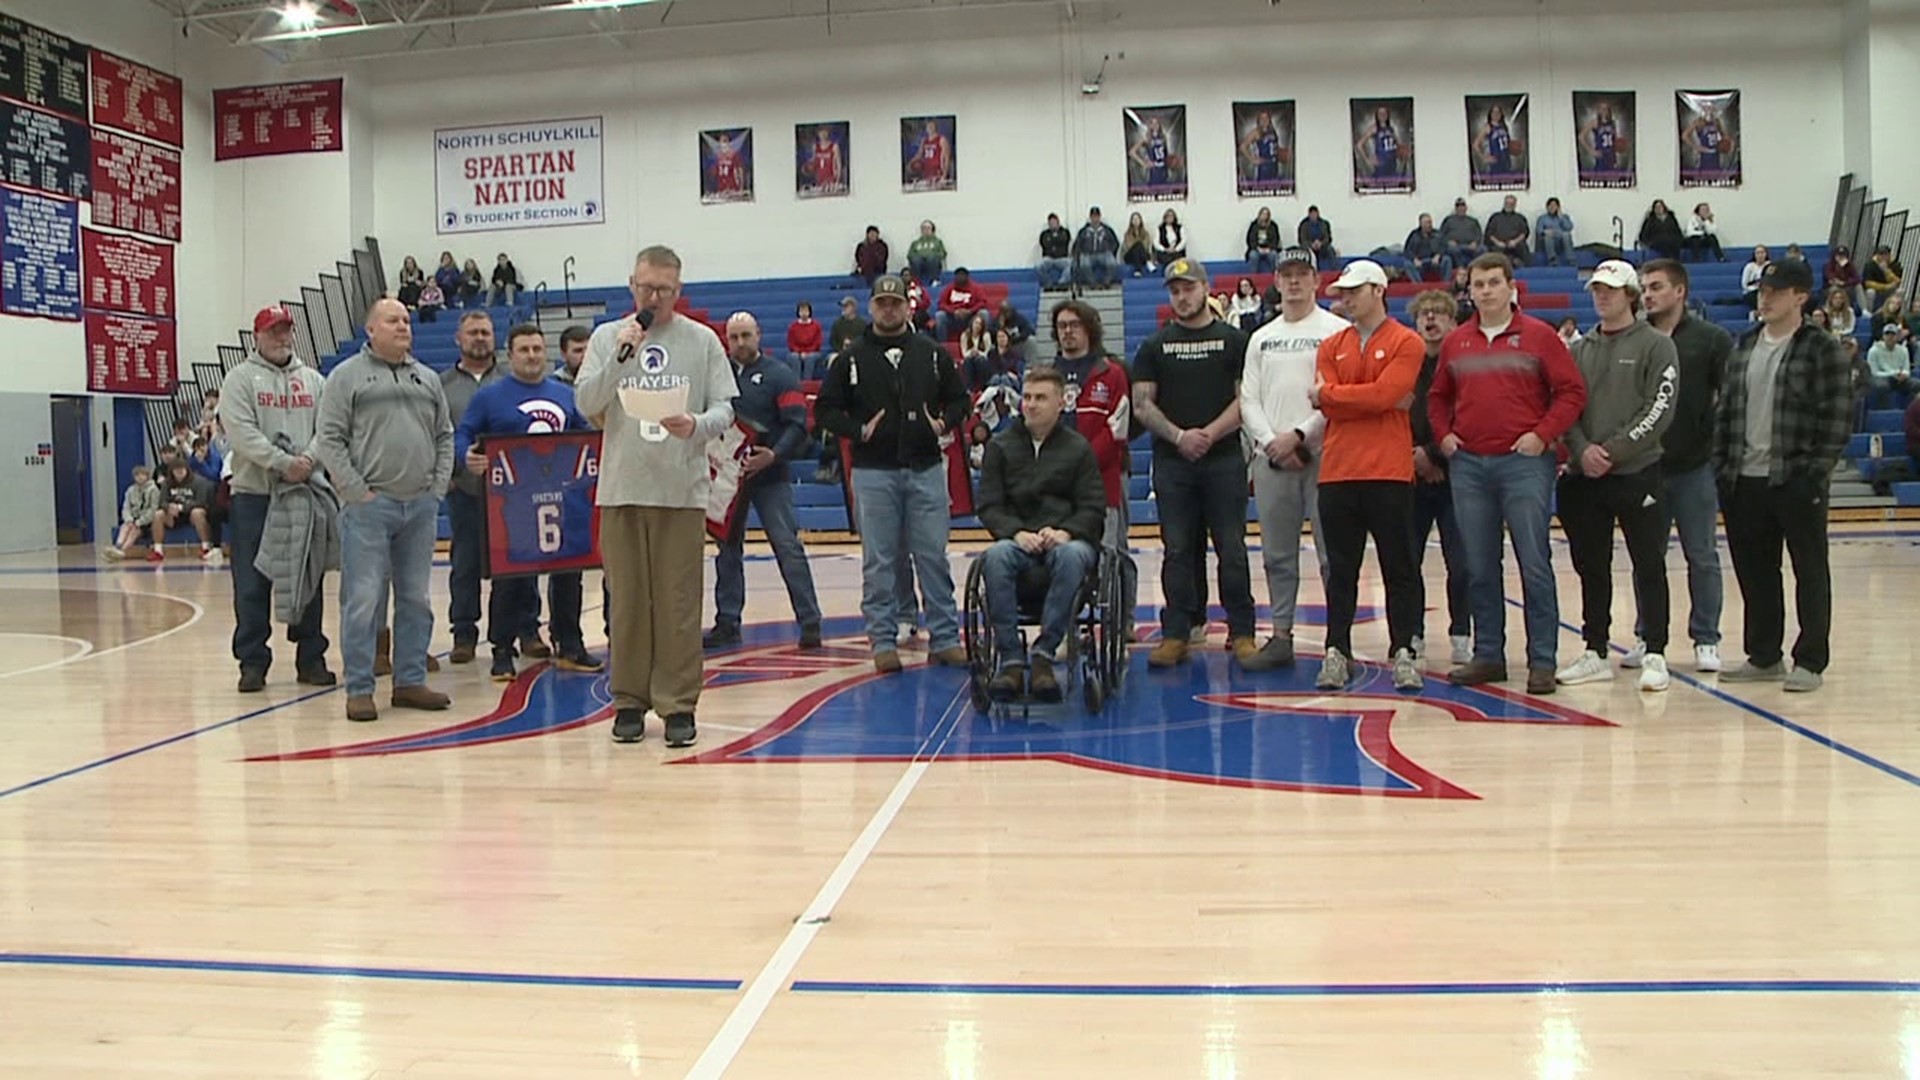 A community came together Saturday to honor an athlete after a devastating injury.